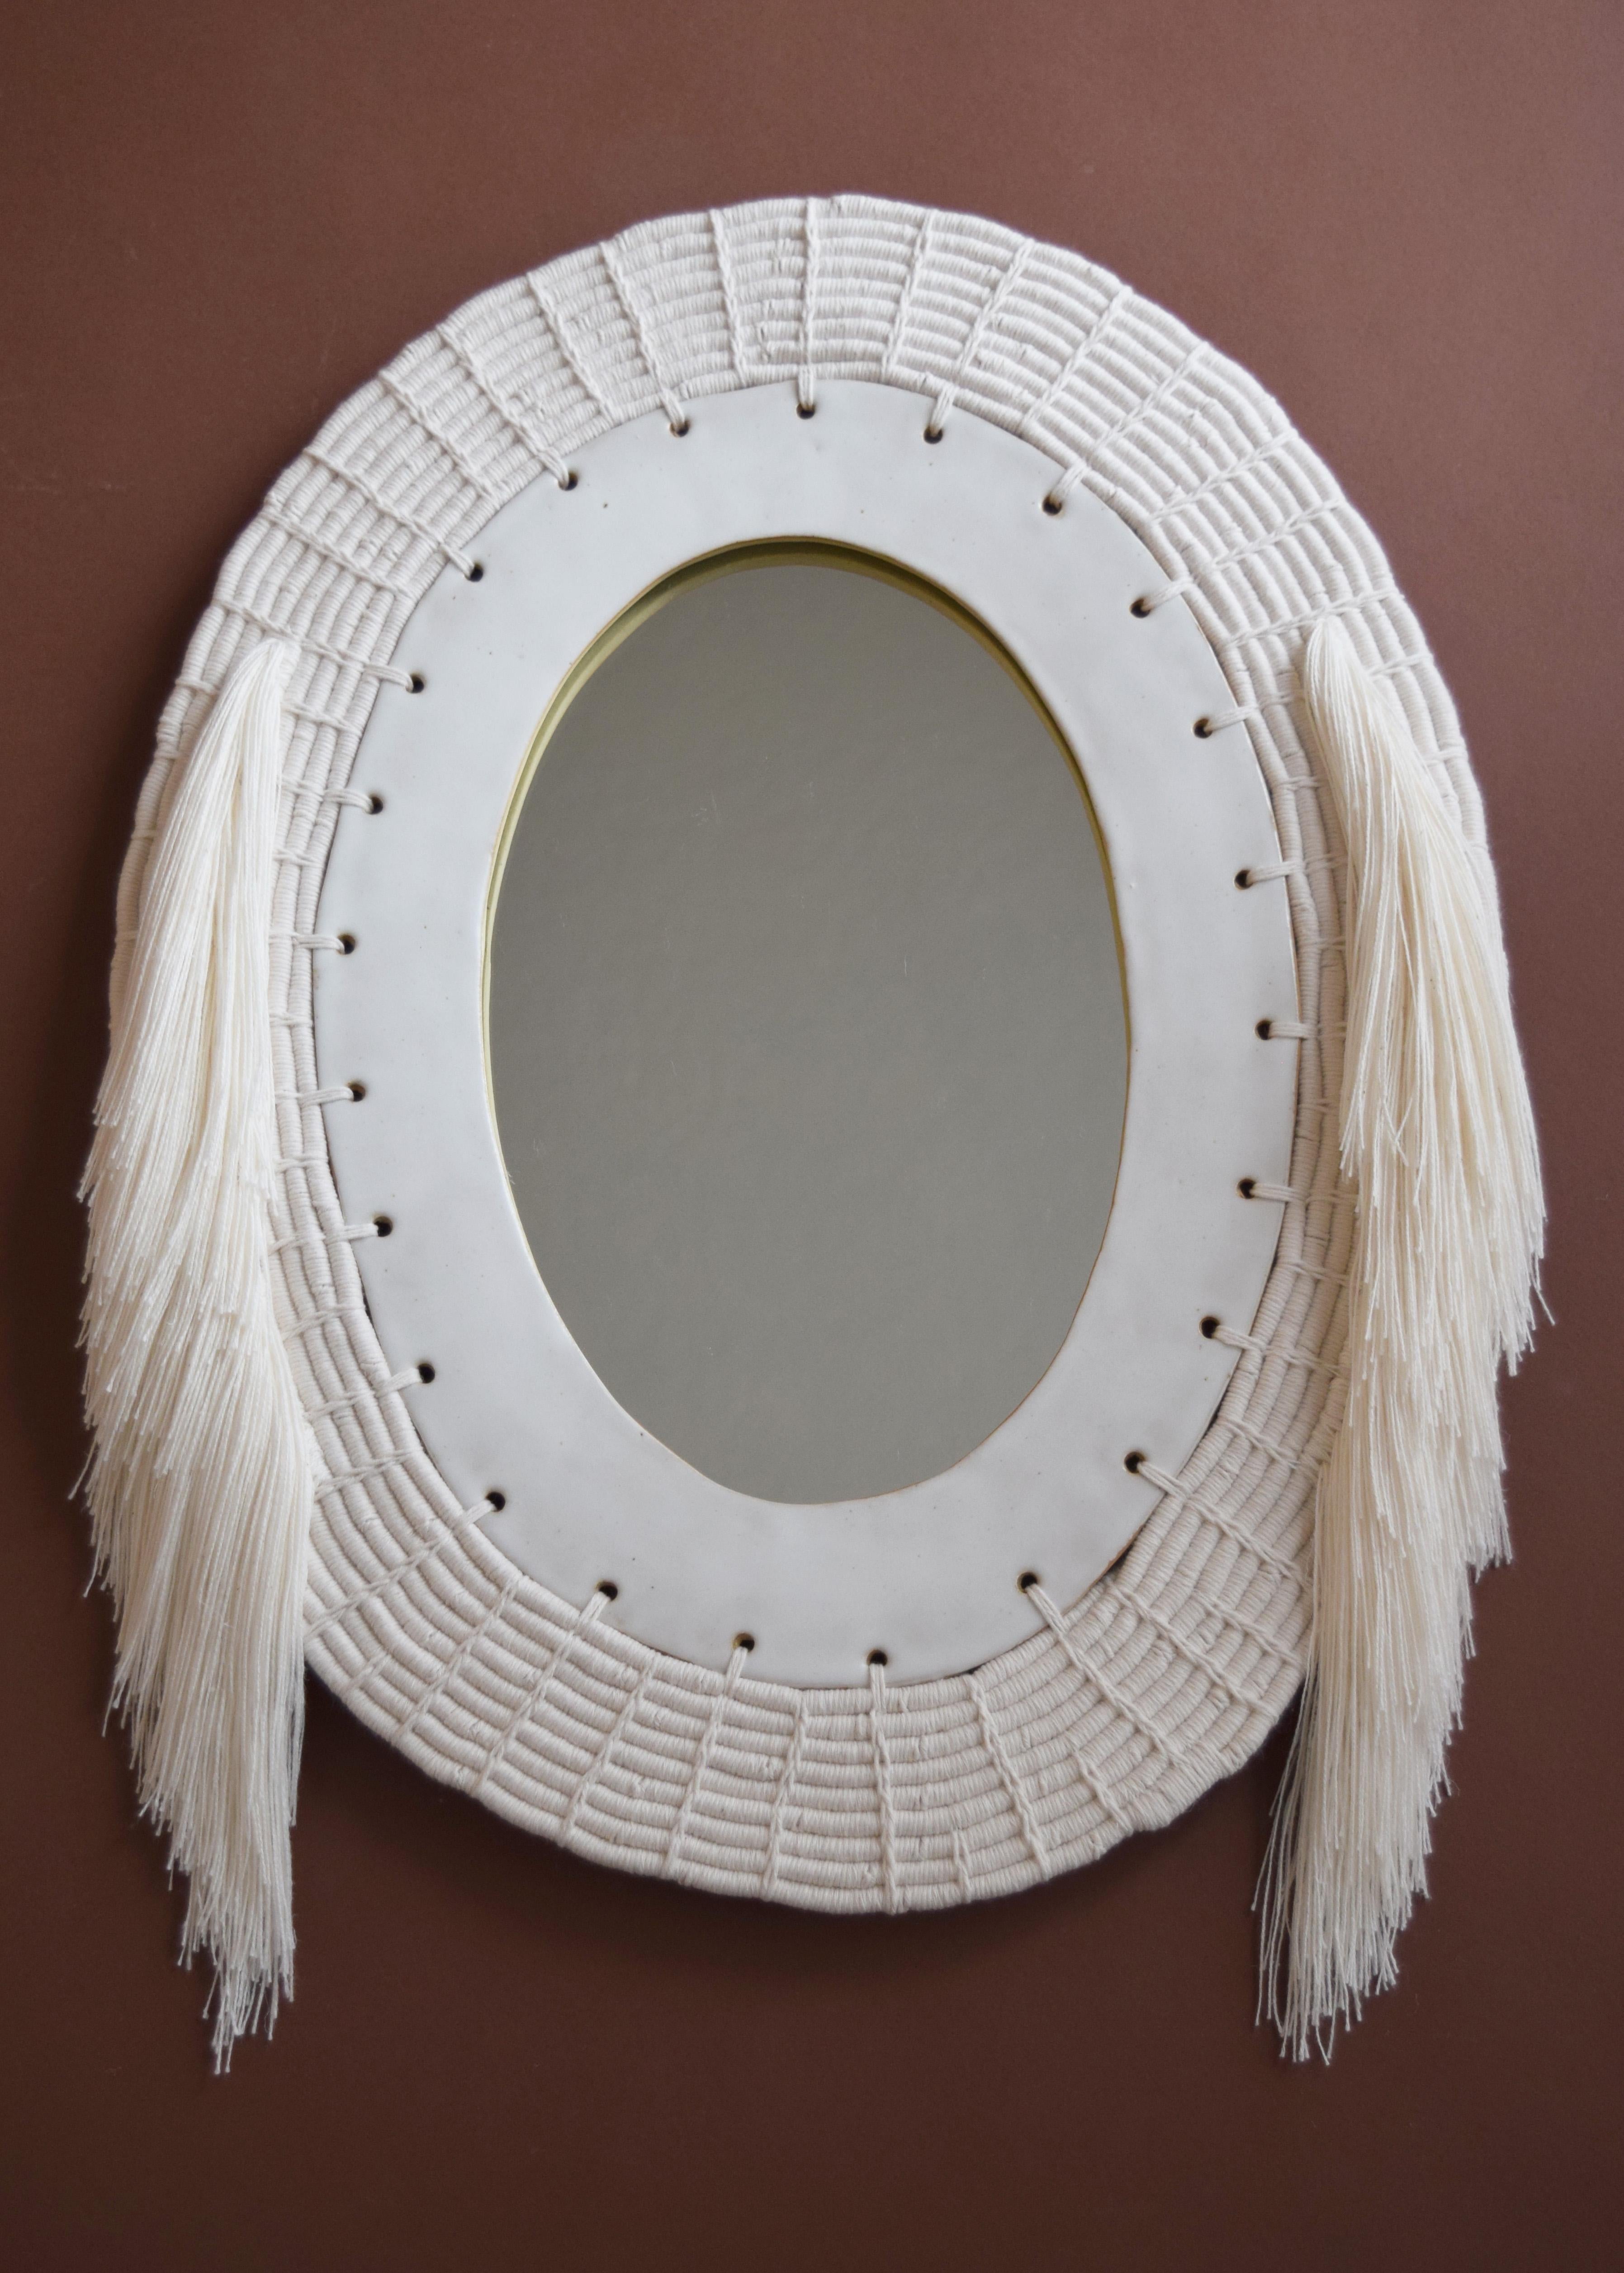 One of a kind mirror #714 by Karen Gayle Tinney

Decorative mirror with hand formed stoneware frame glazed in satin white. The frame exterior is woven in white cotton with white cotton fringe, using a coiling technique which is a signature of the